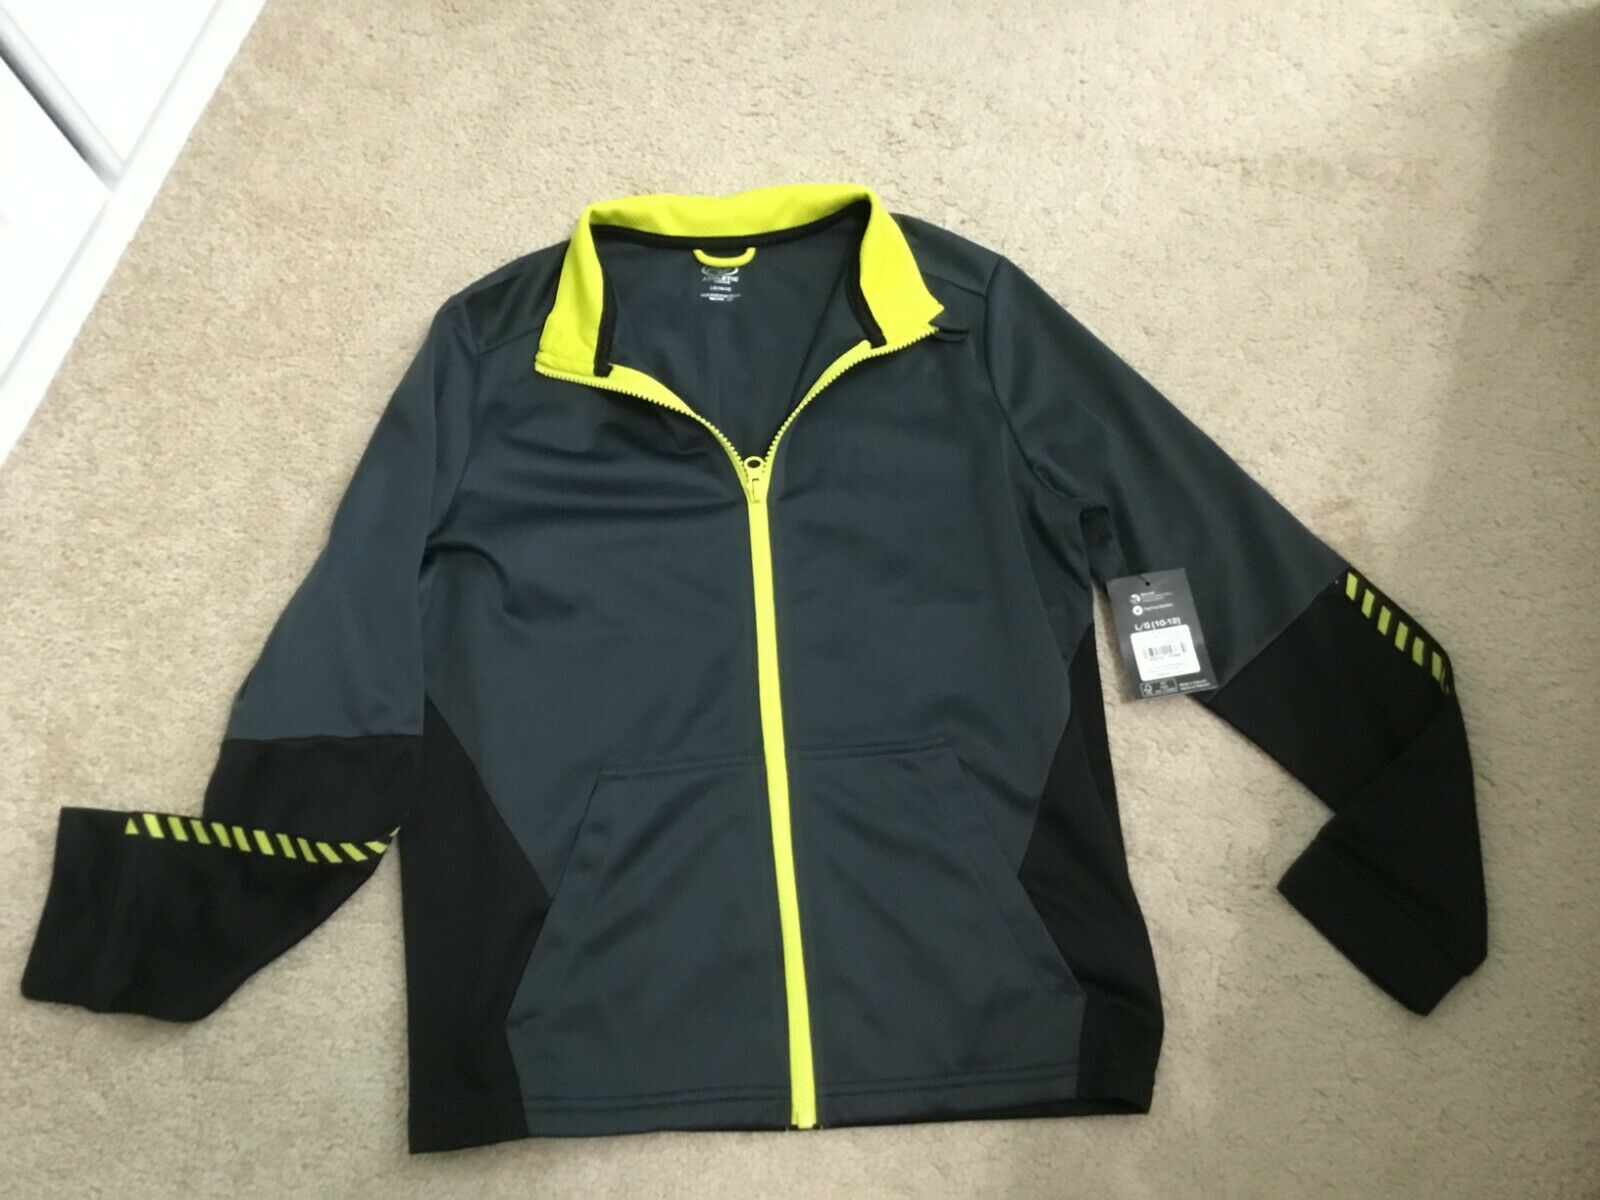 BOY'S ATHLETIC TRACT JACKET SIZE L 10-12 NWT!